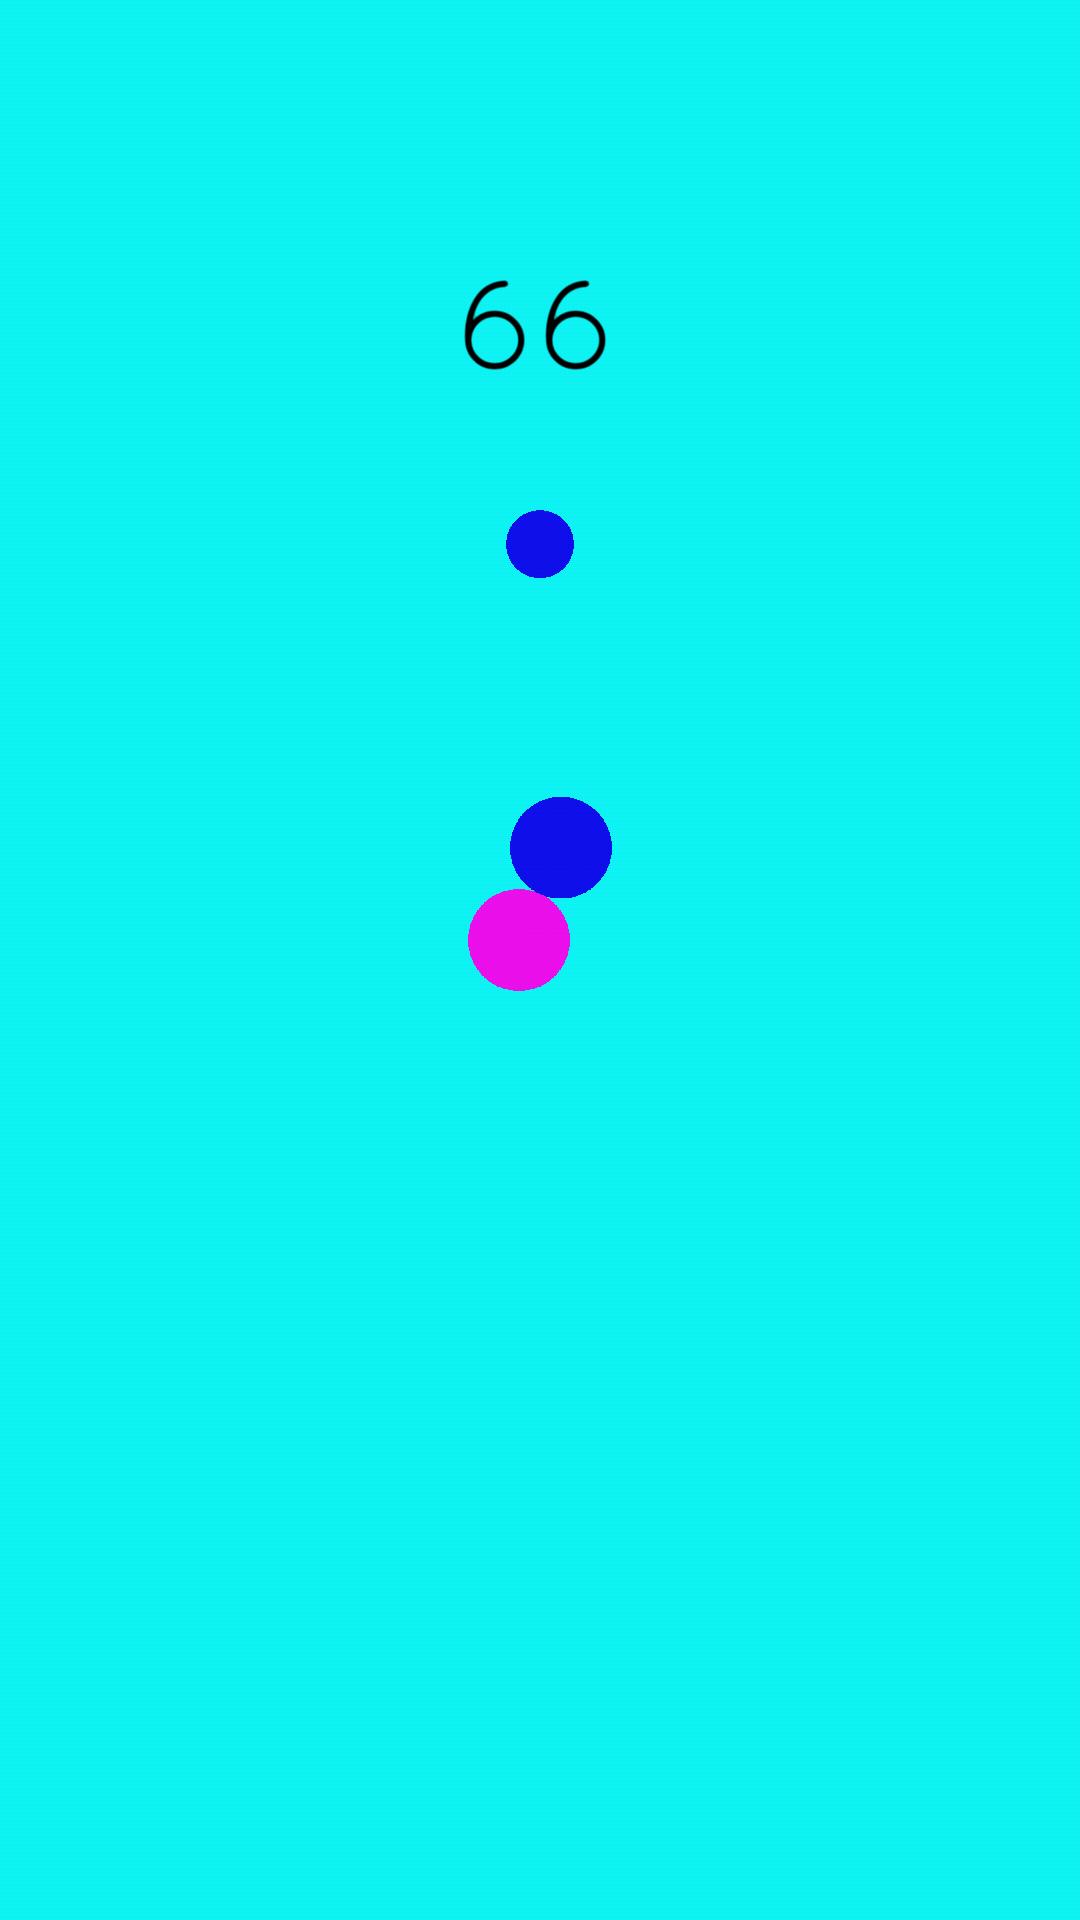 2-dots-scoring-game-apk-for-android-download